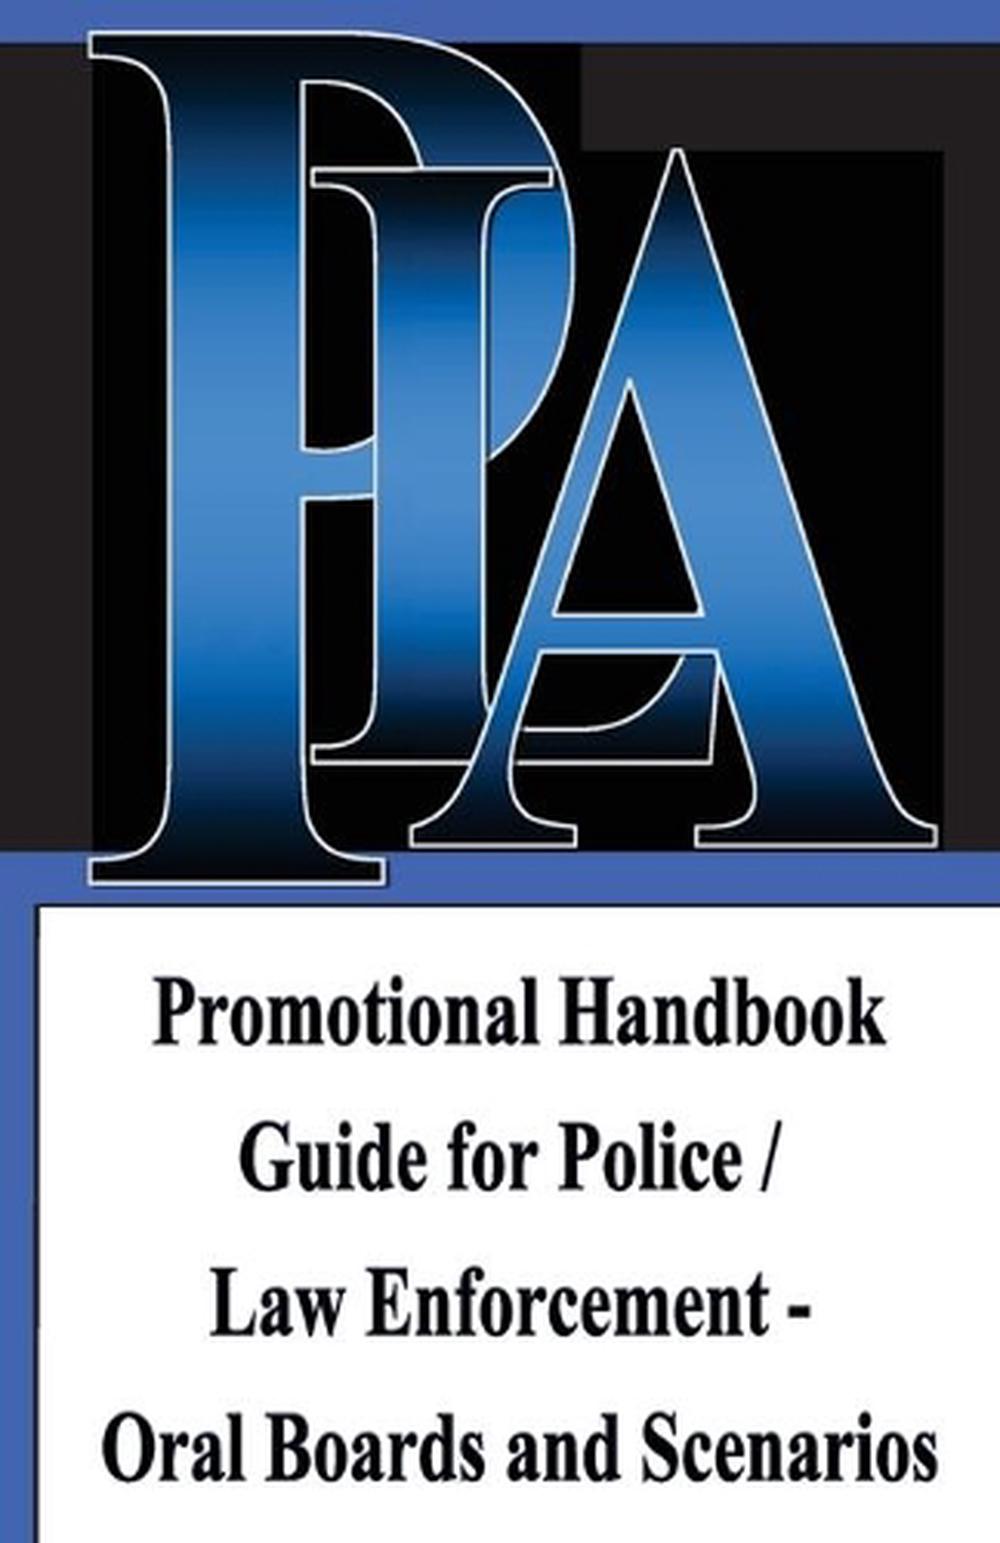 Promotional Handbook Guide for Police / Law Enforcement Oral Boards